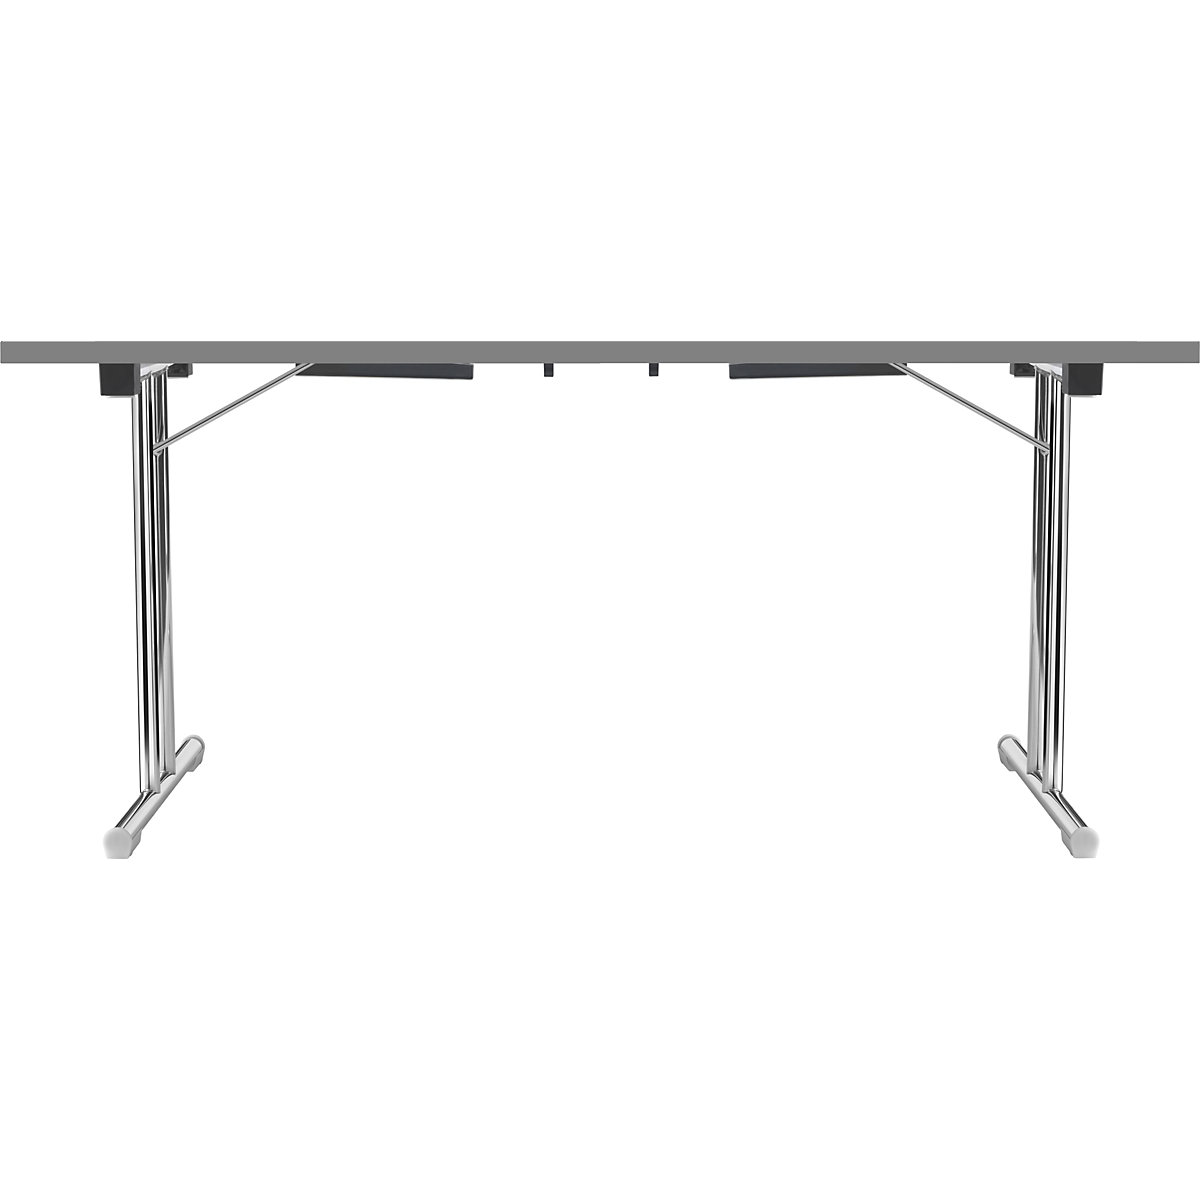 Folding table with double T base, tubular steel frame, chrome plated, white/charcoal, WxD 1400 x 700 mm-11